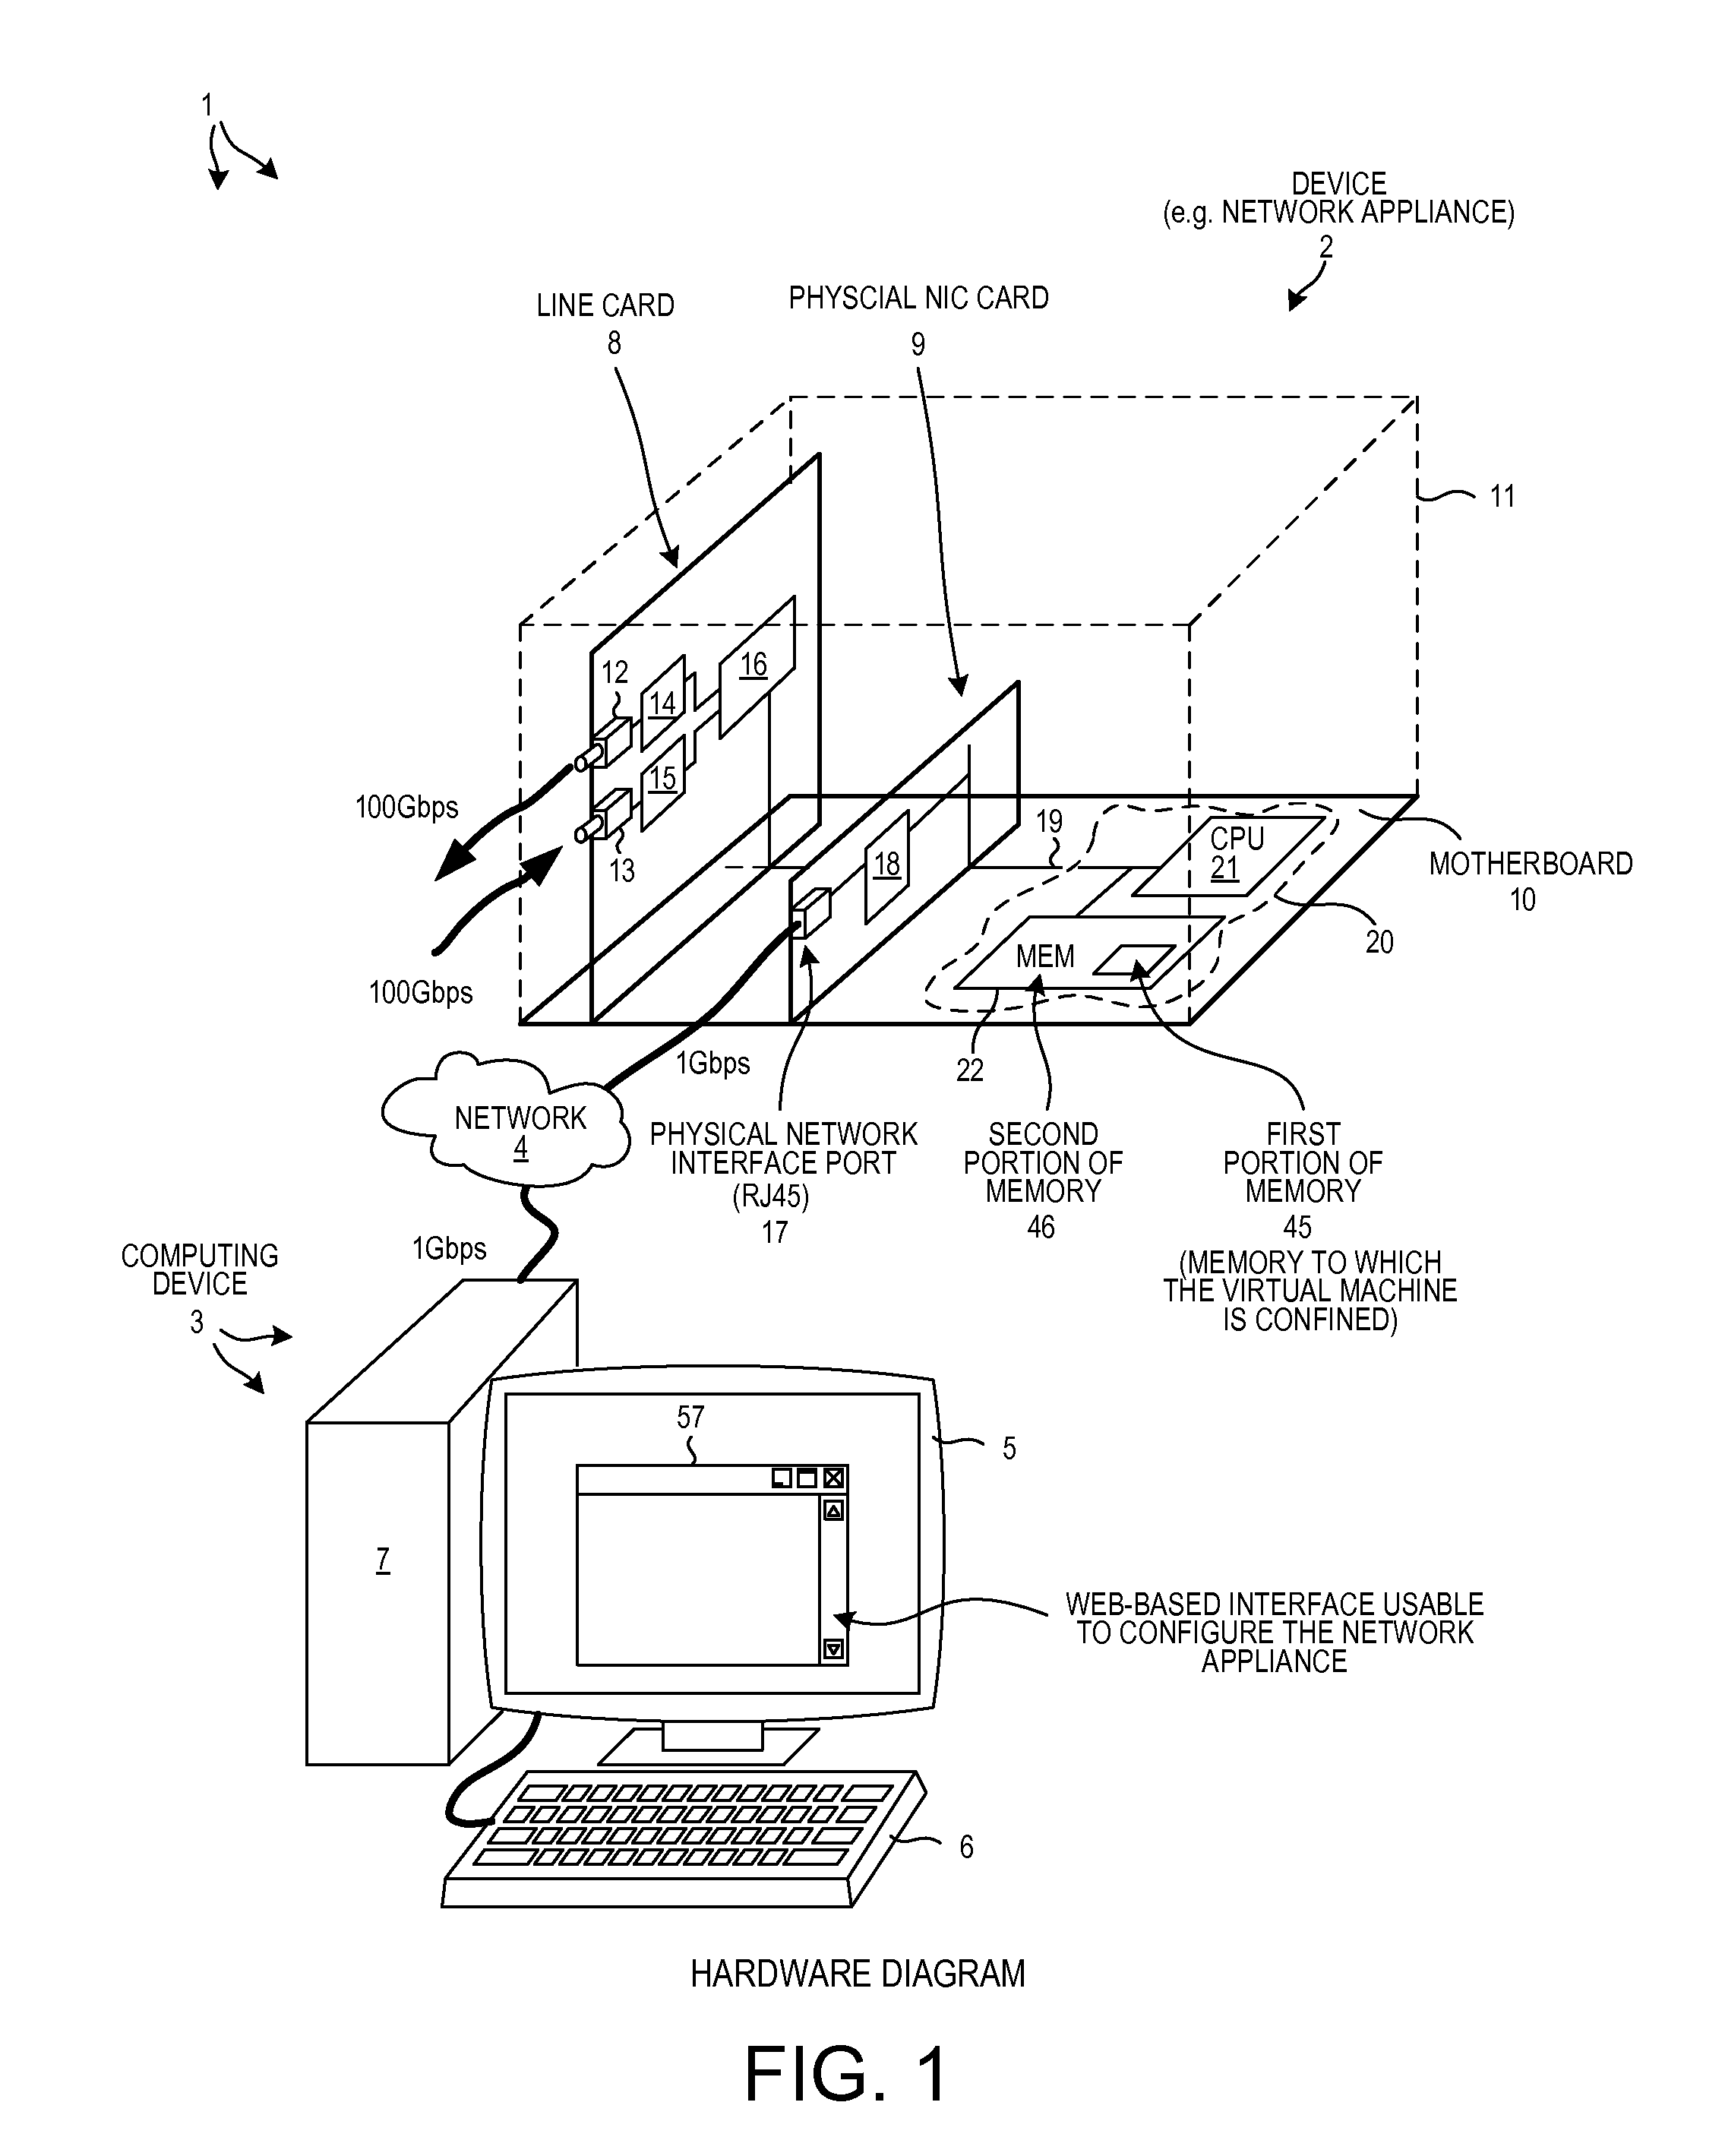 Compartmentalization of the user network interface to a device